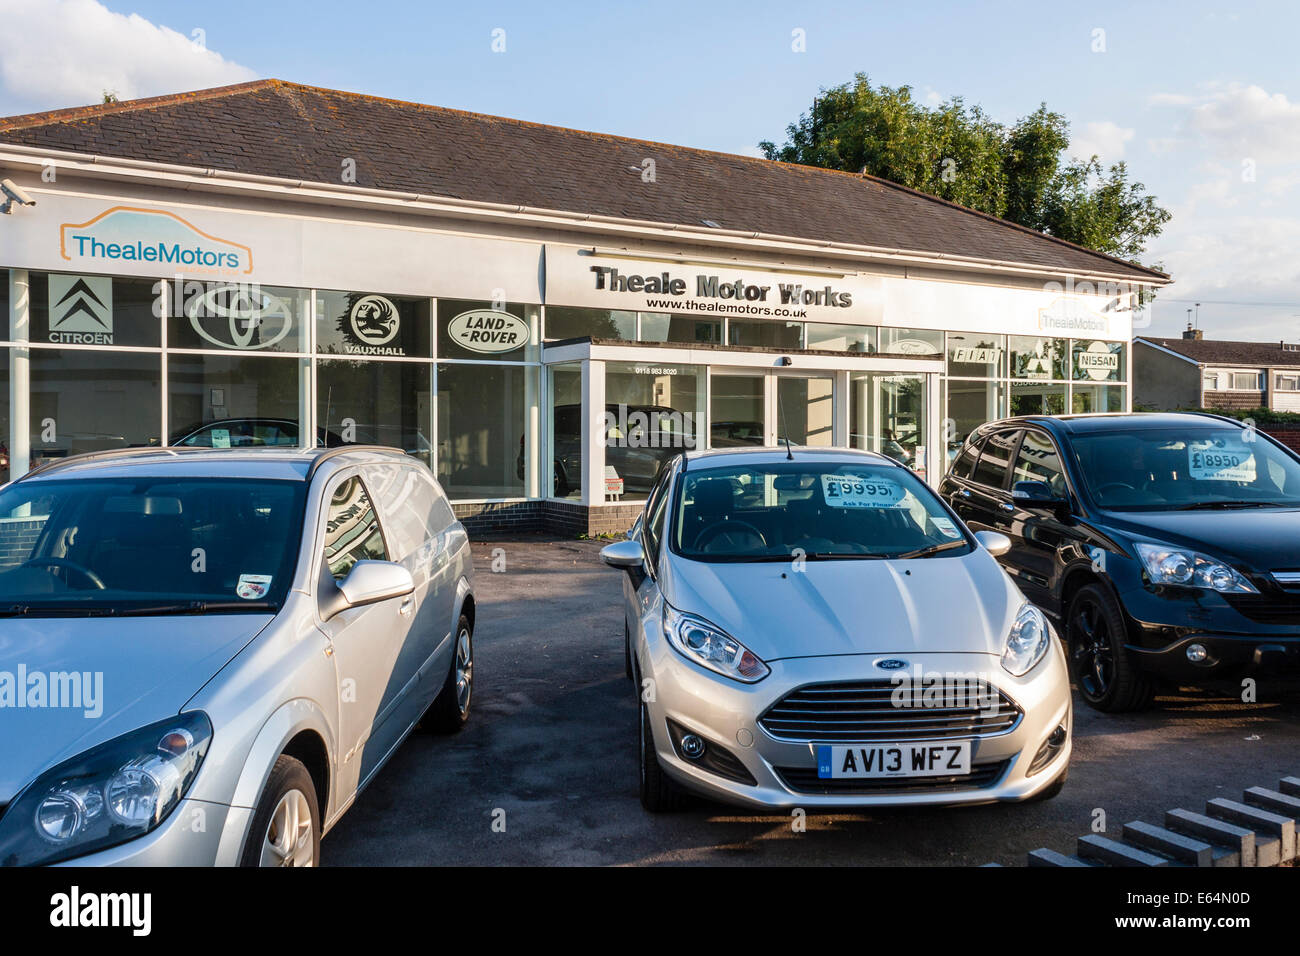 Second-hand Car Dealers, Theale, Berkshire, England, GB, UK. Stock Photo